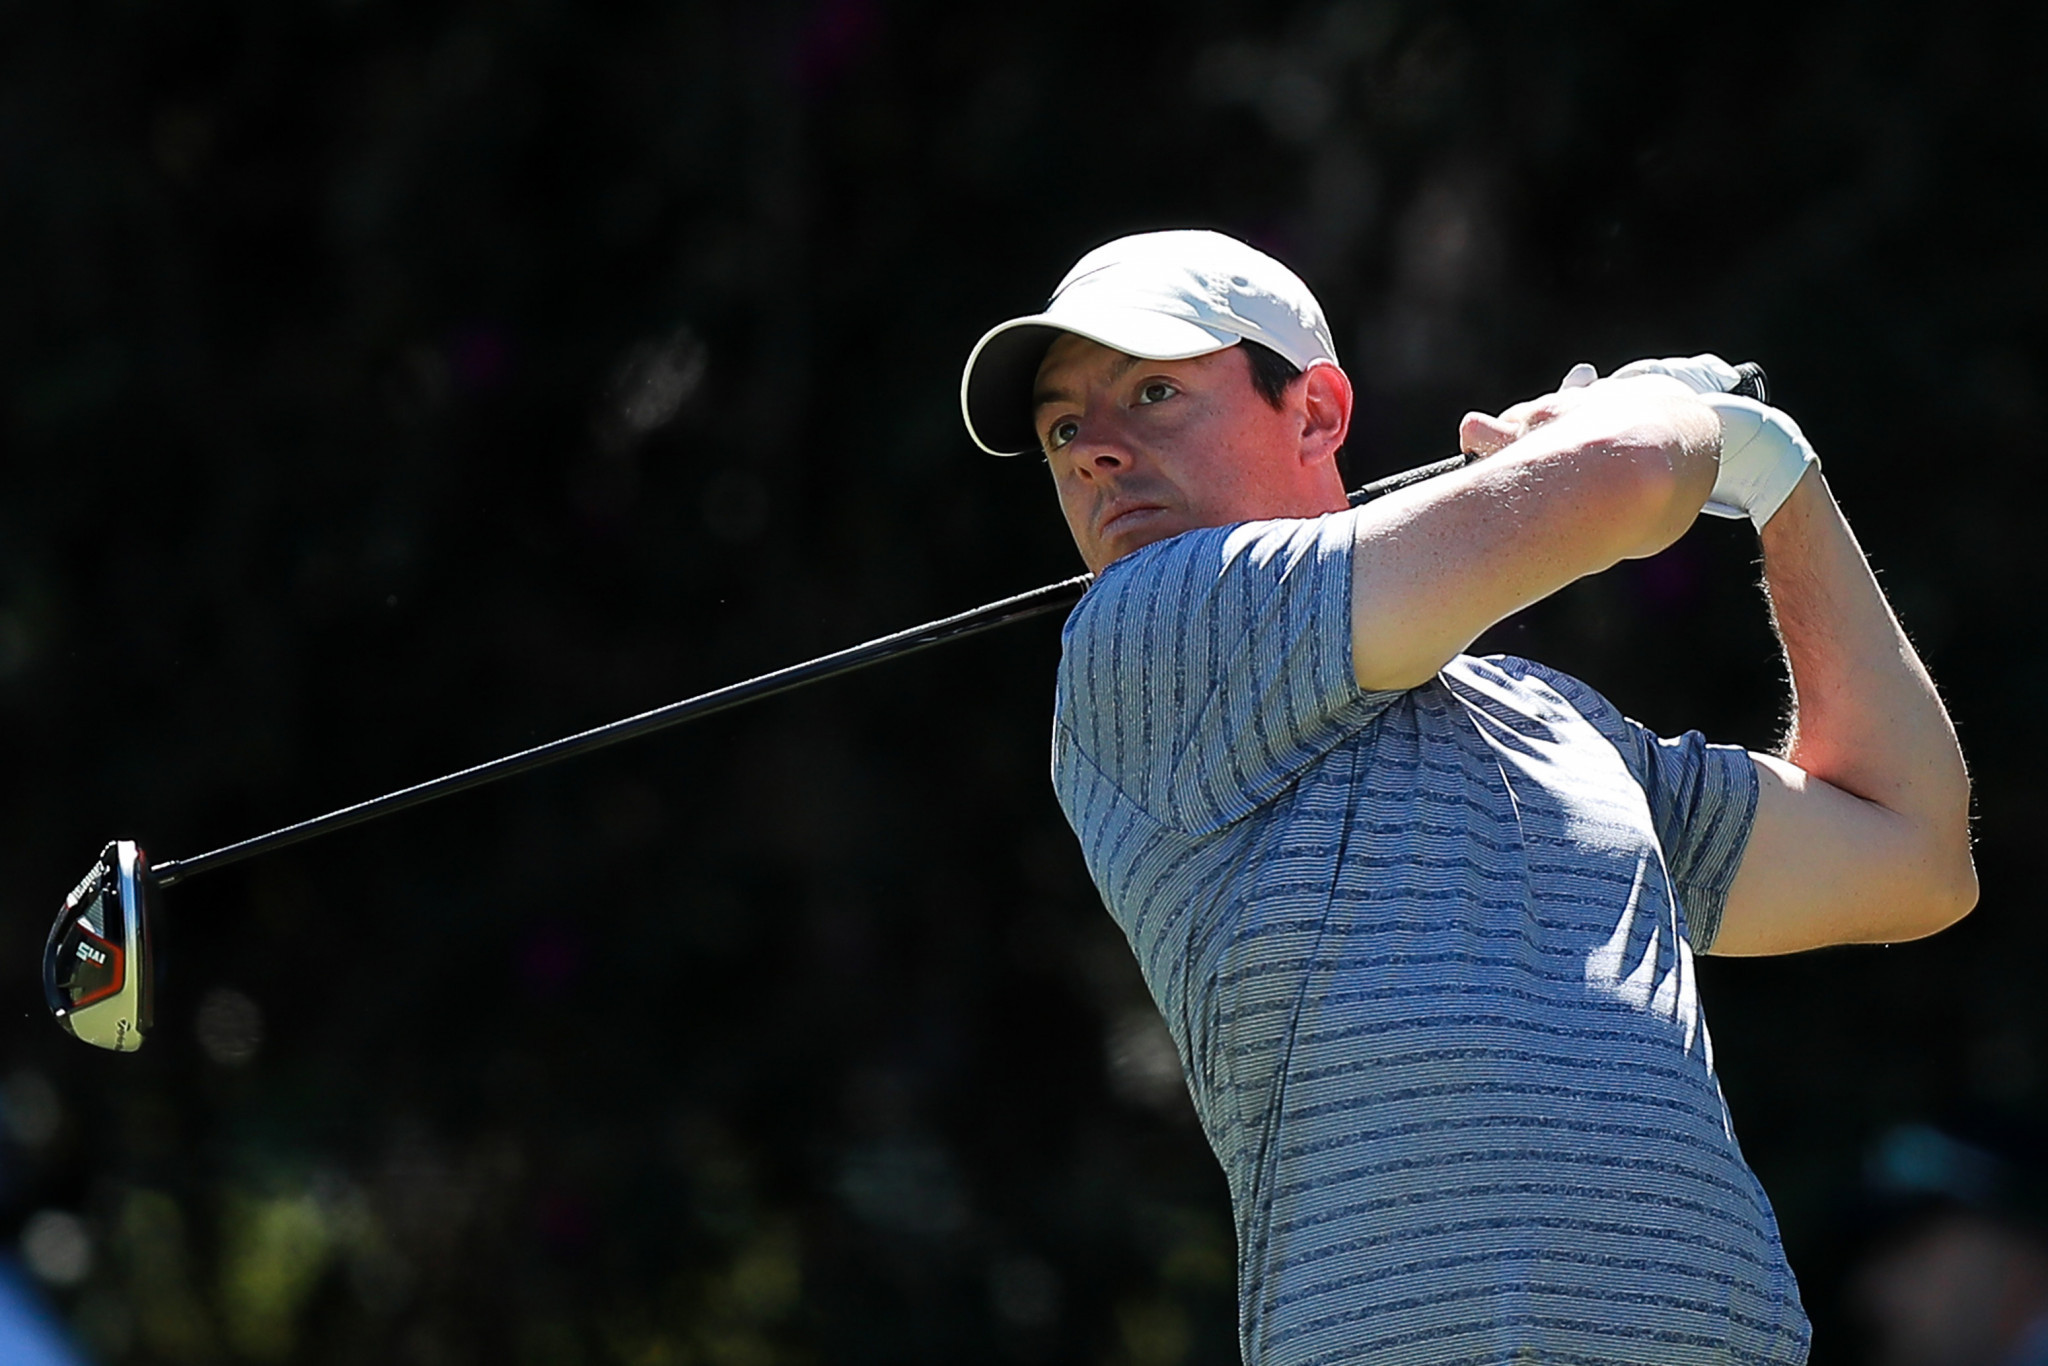 Northern Ireland's Rory McIlroy carded a sublime eight-under 63 to earn a one-shot lead after the opening round of the World Golf Championships-Mexico Championship ©Getty Images